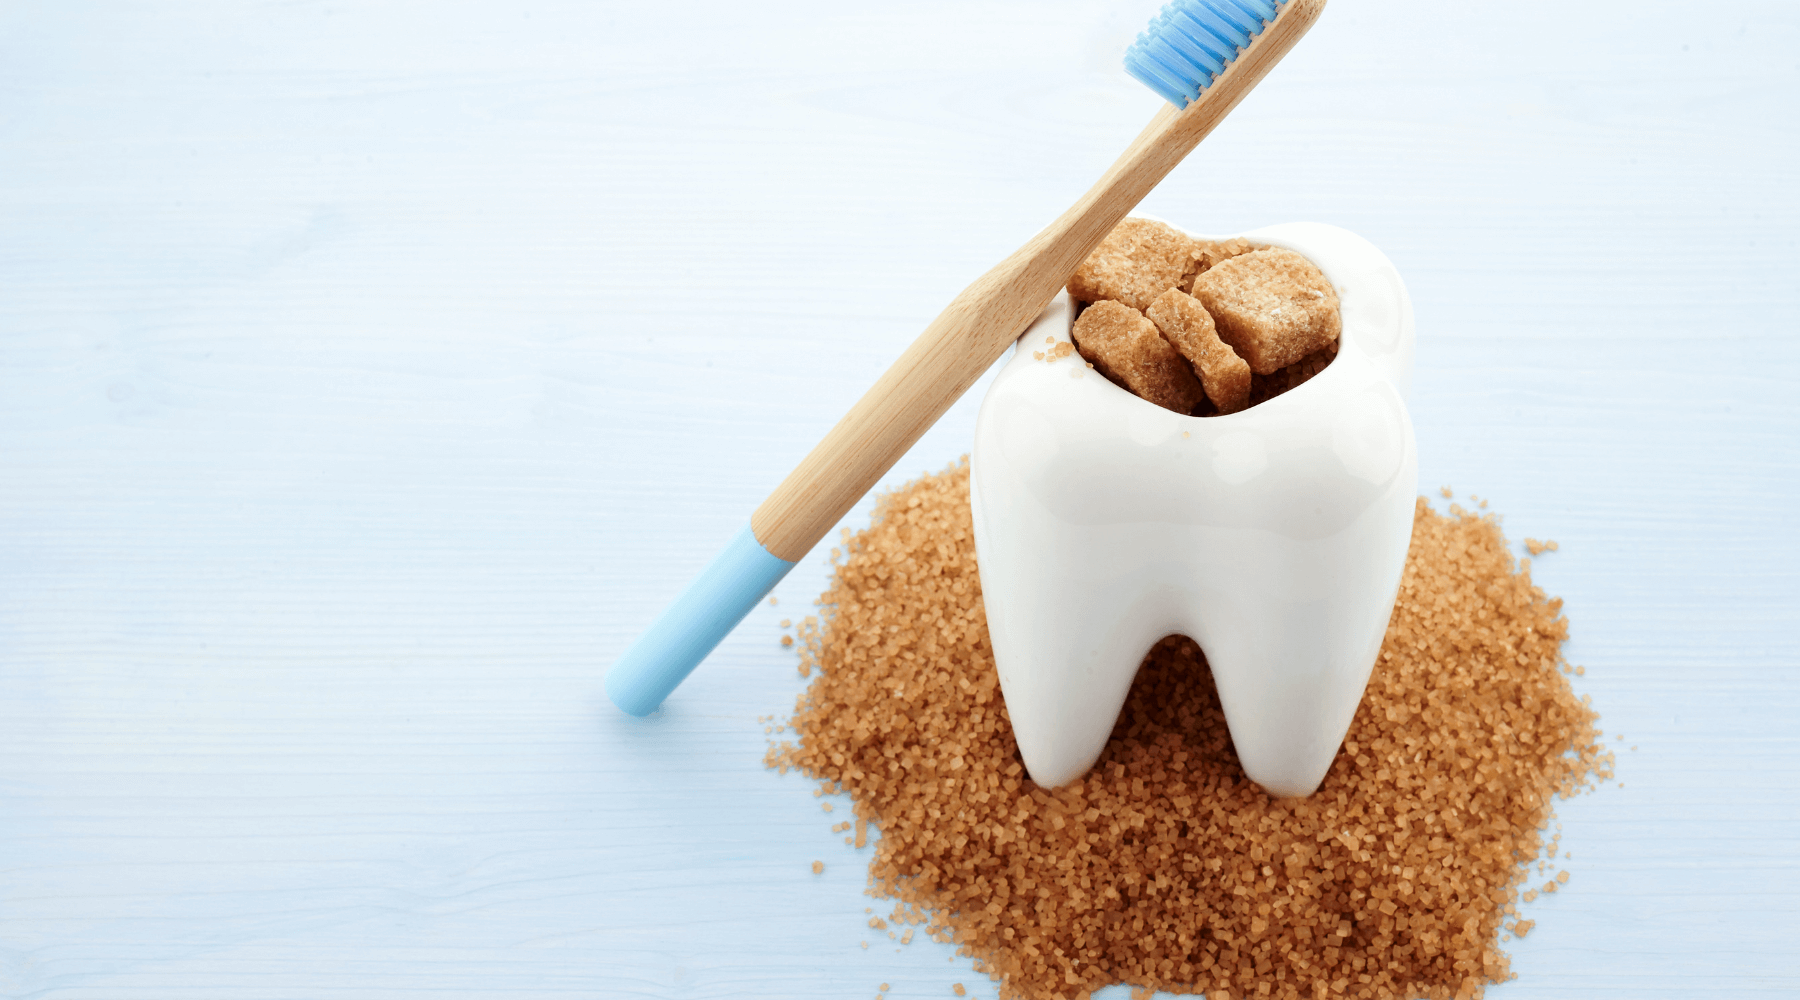 Dentist and Diabetes: What We Need to Know